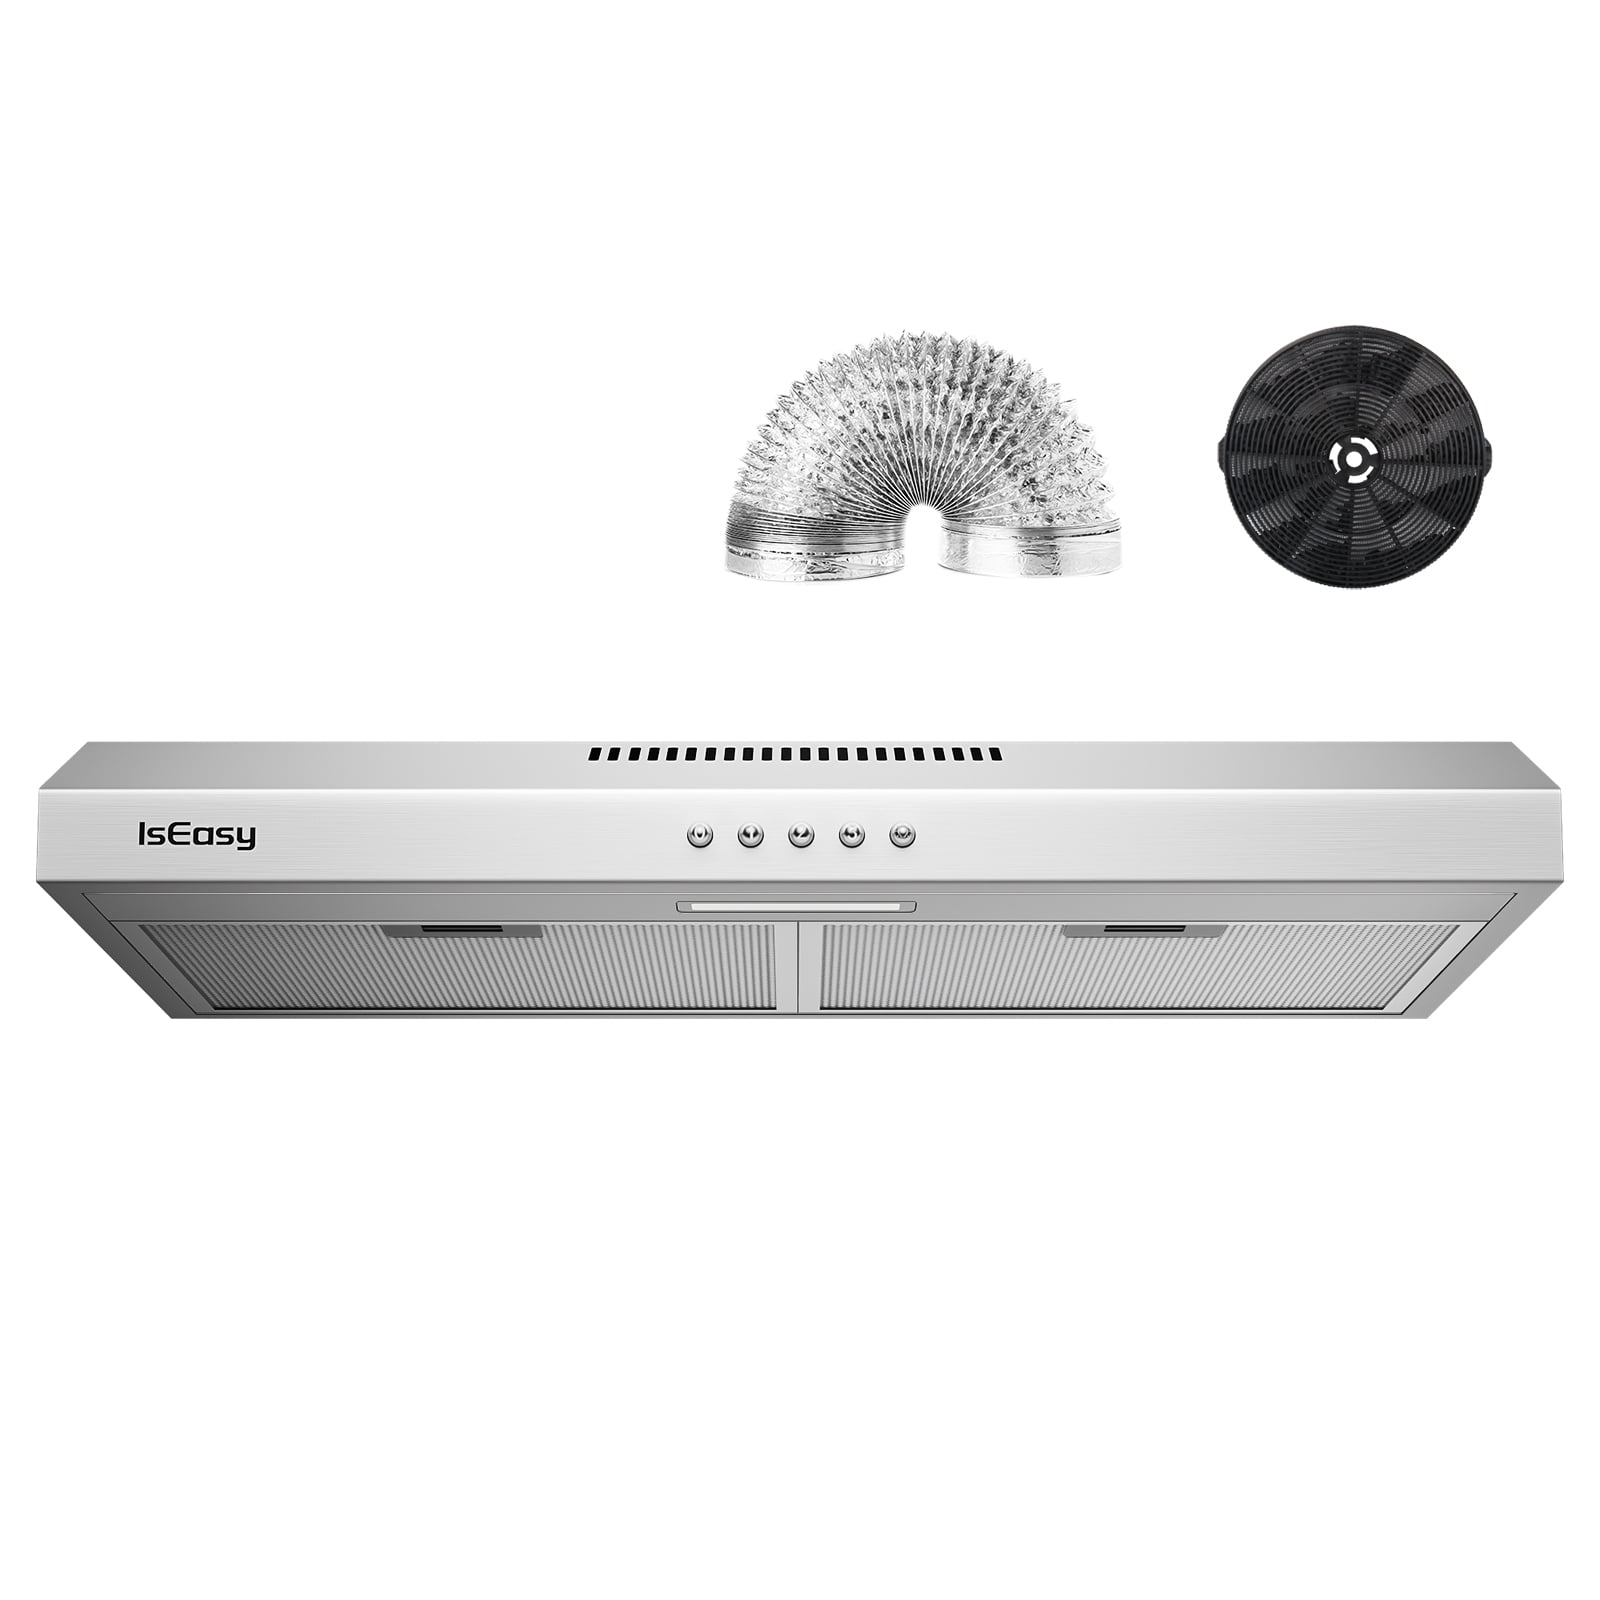  Black Range hood 30 inch, 300CFM Under Cabinet Range Hood with  Ducted/Ductless Convertible Slim Kitchen Over Stove Vent, 3 Speed Exhaust  Fan, LED Lights, Vent Hood with Charcoal Filter : Appliances